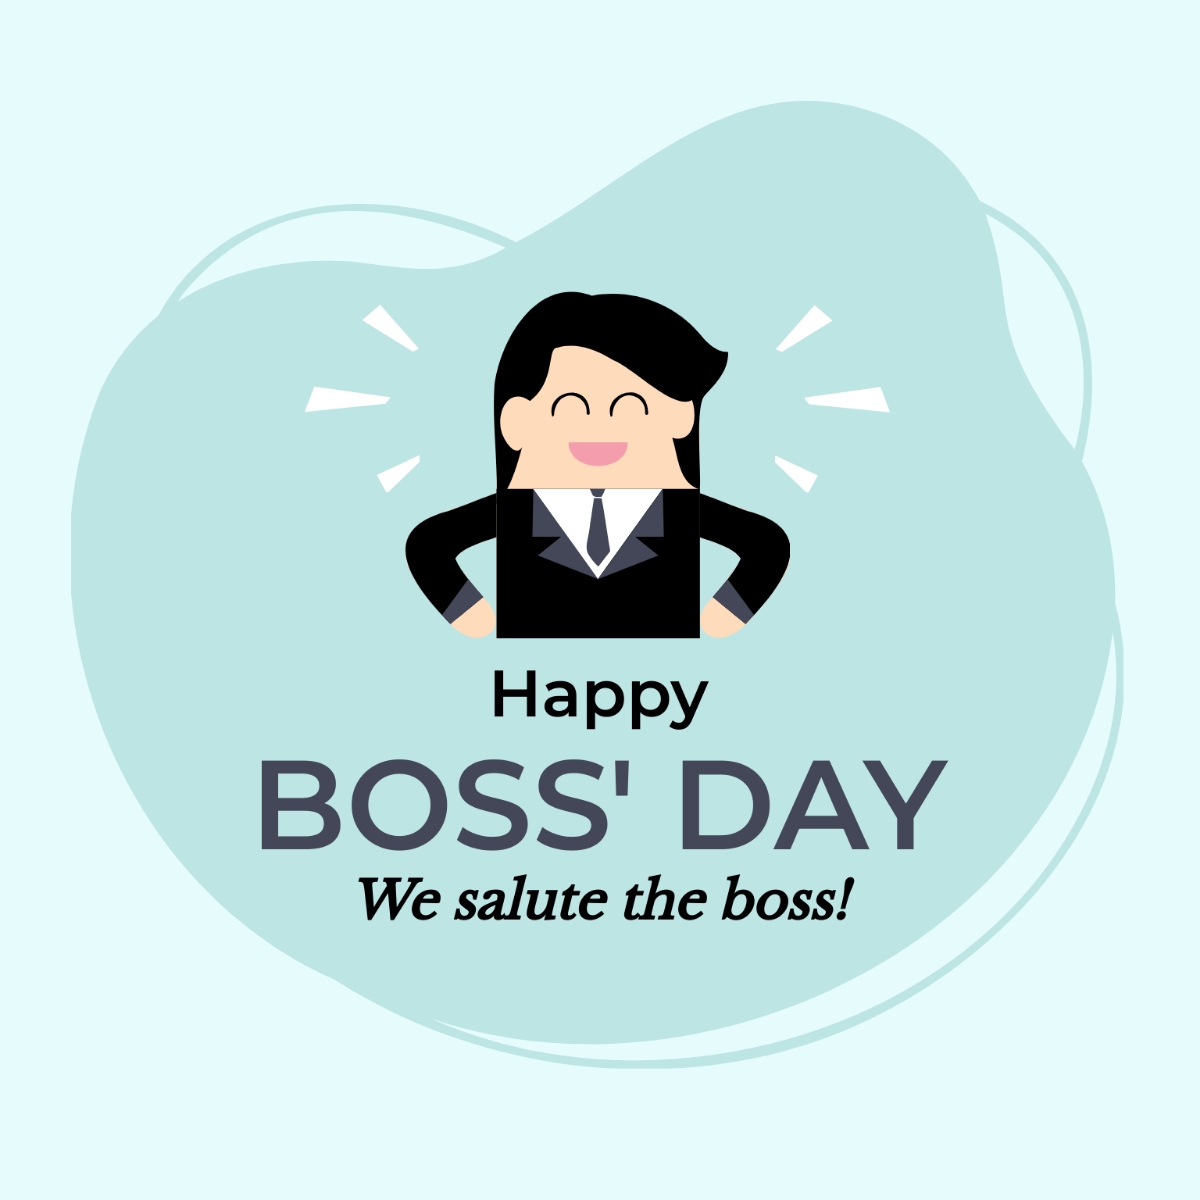 Free Boss' Day Poster Vector Template